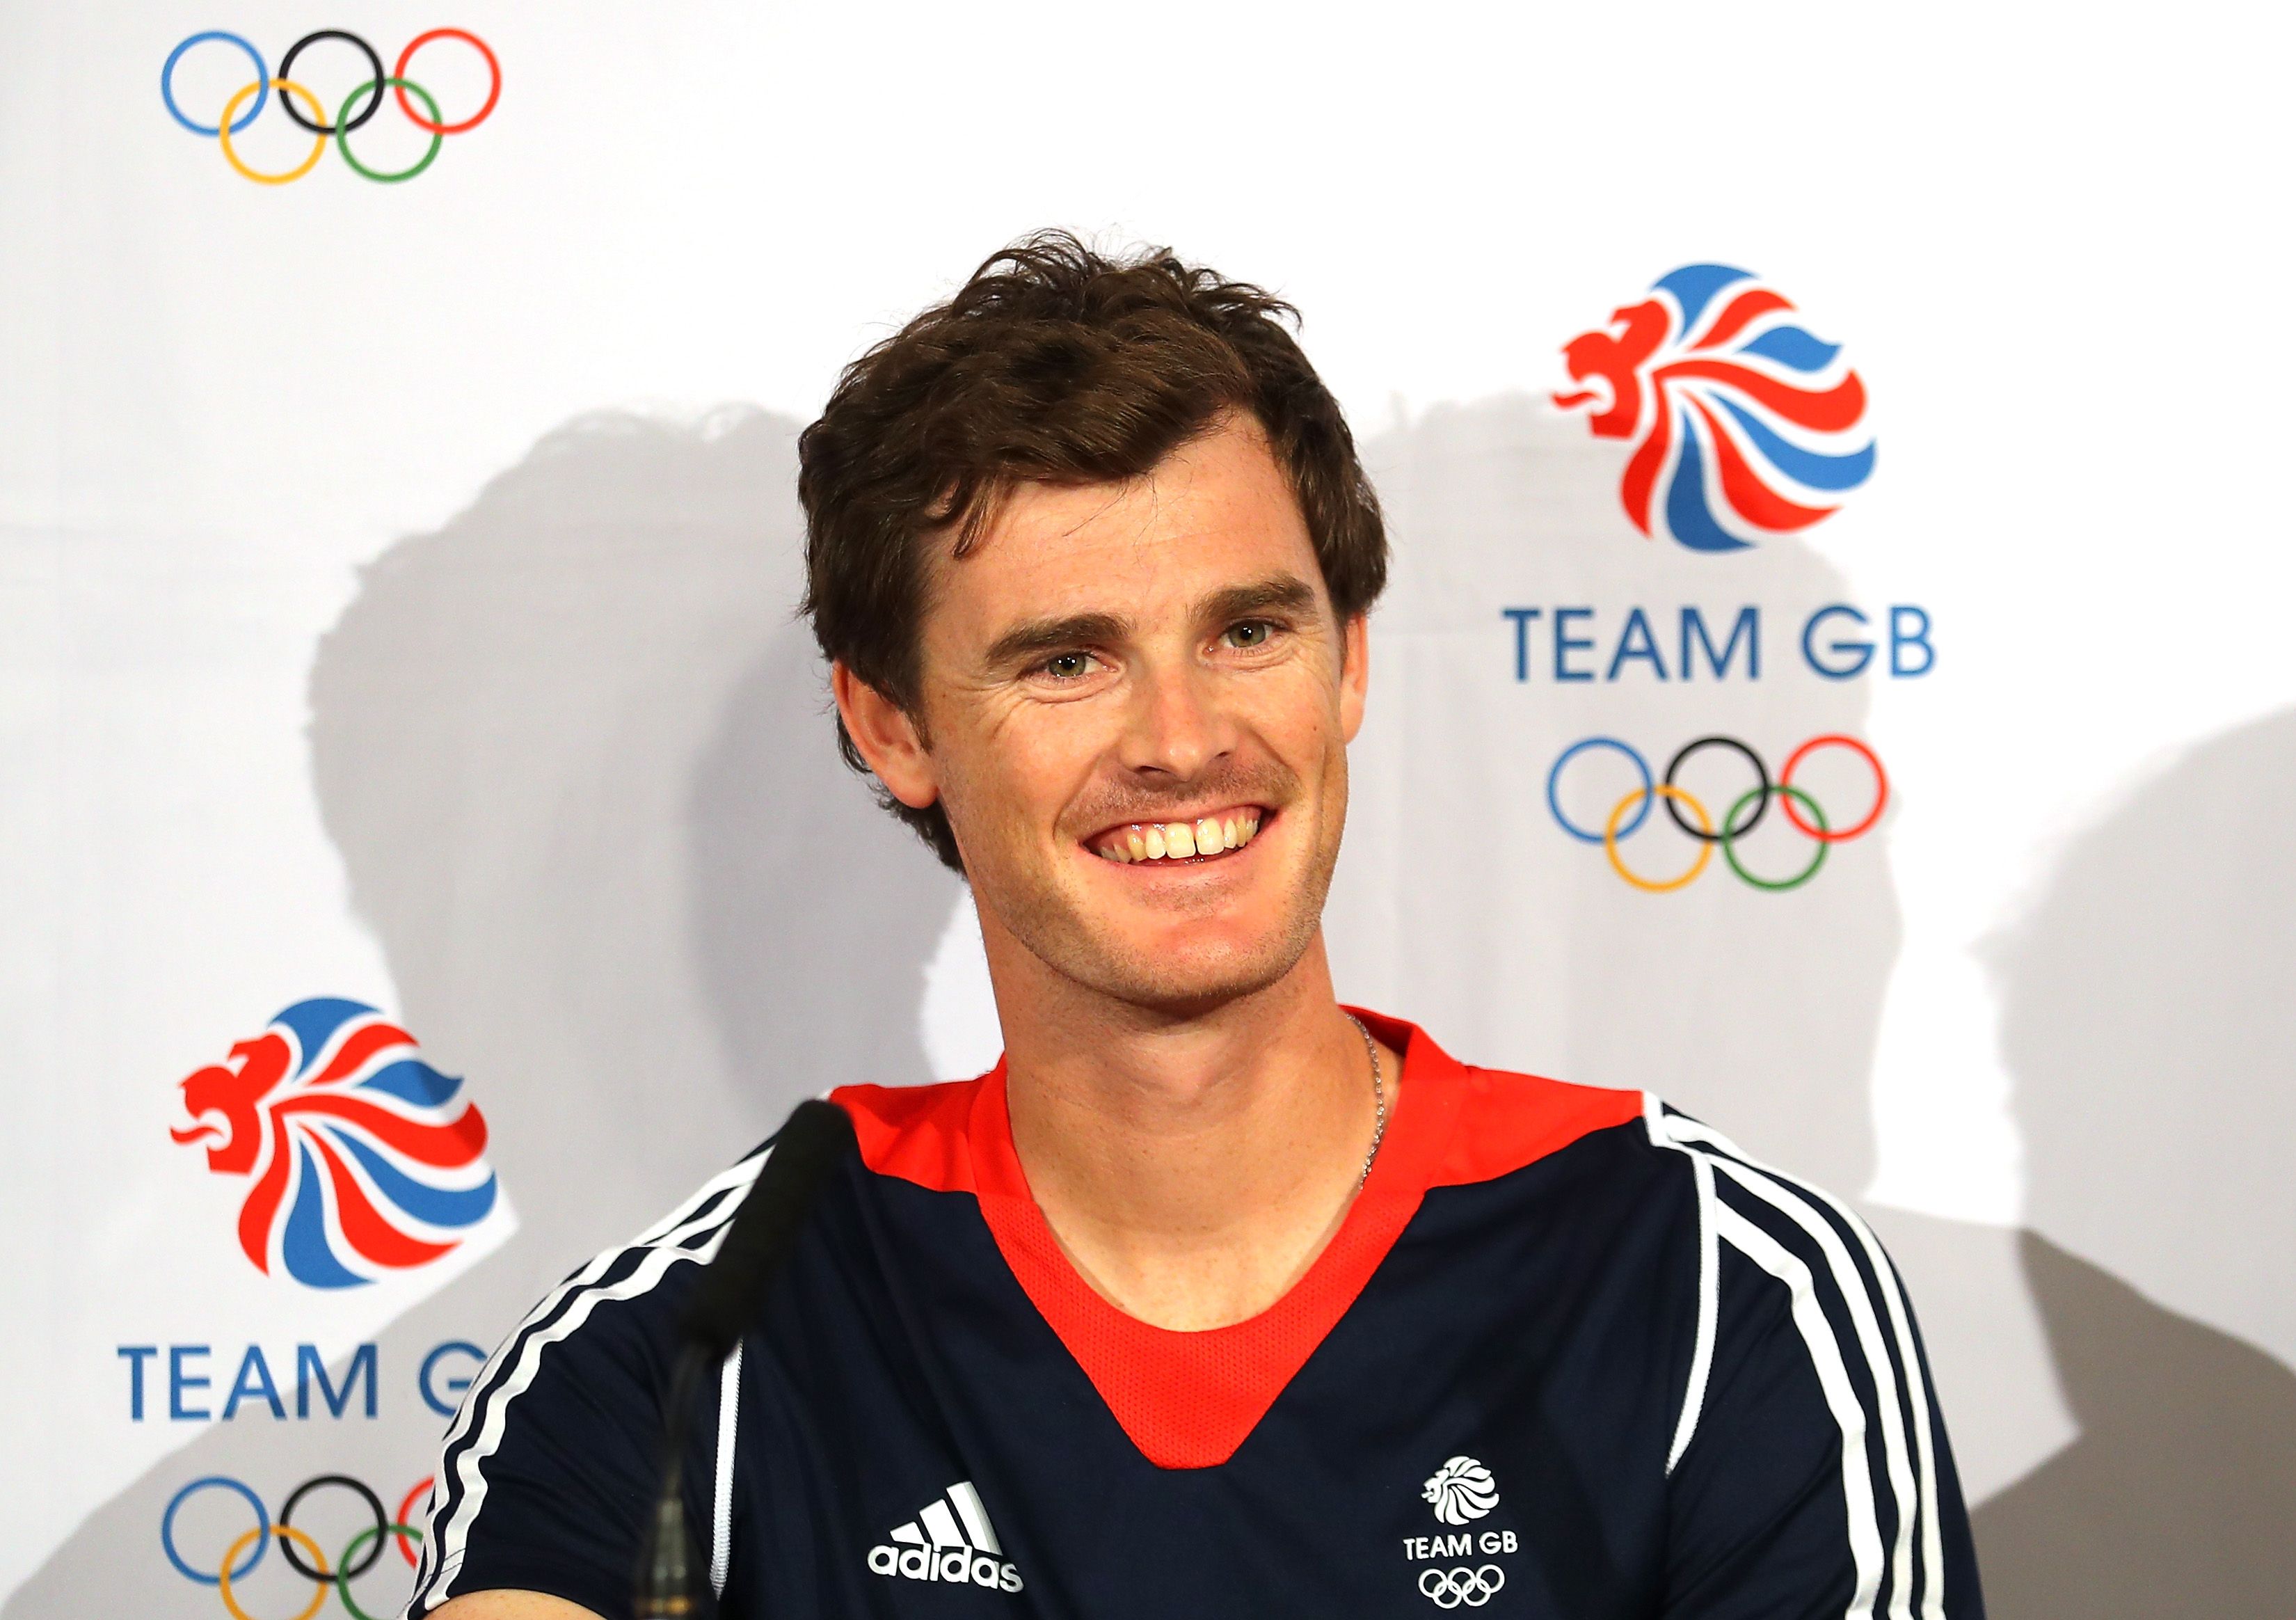 LONDON, ENGLAND - JUNE 10: Jamie Murray of Great Britain speaks to the media during an announcement of tennis athletes named in Team GB for the Rio 2016 Olympic Games at The Queen's Club on June 10, 2016 in London, England. (Photo by Warren Little/Getty Images)